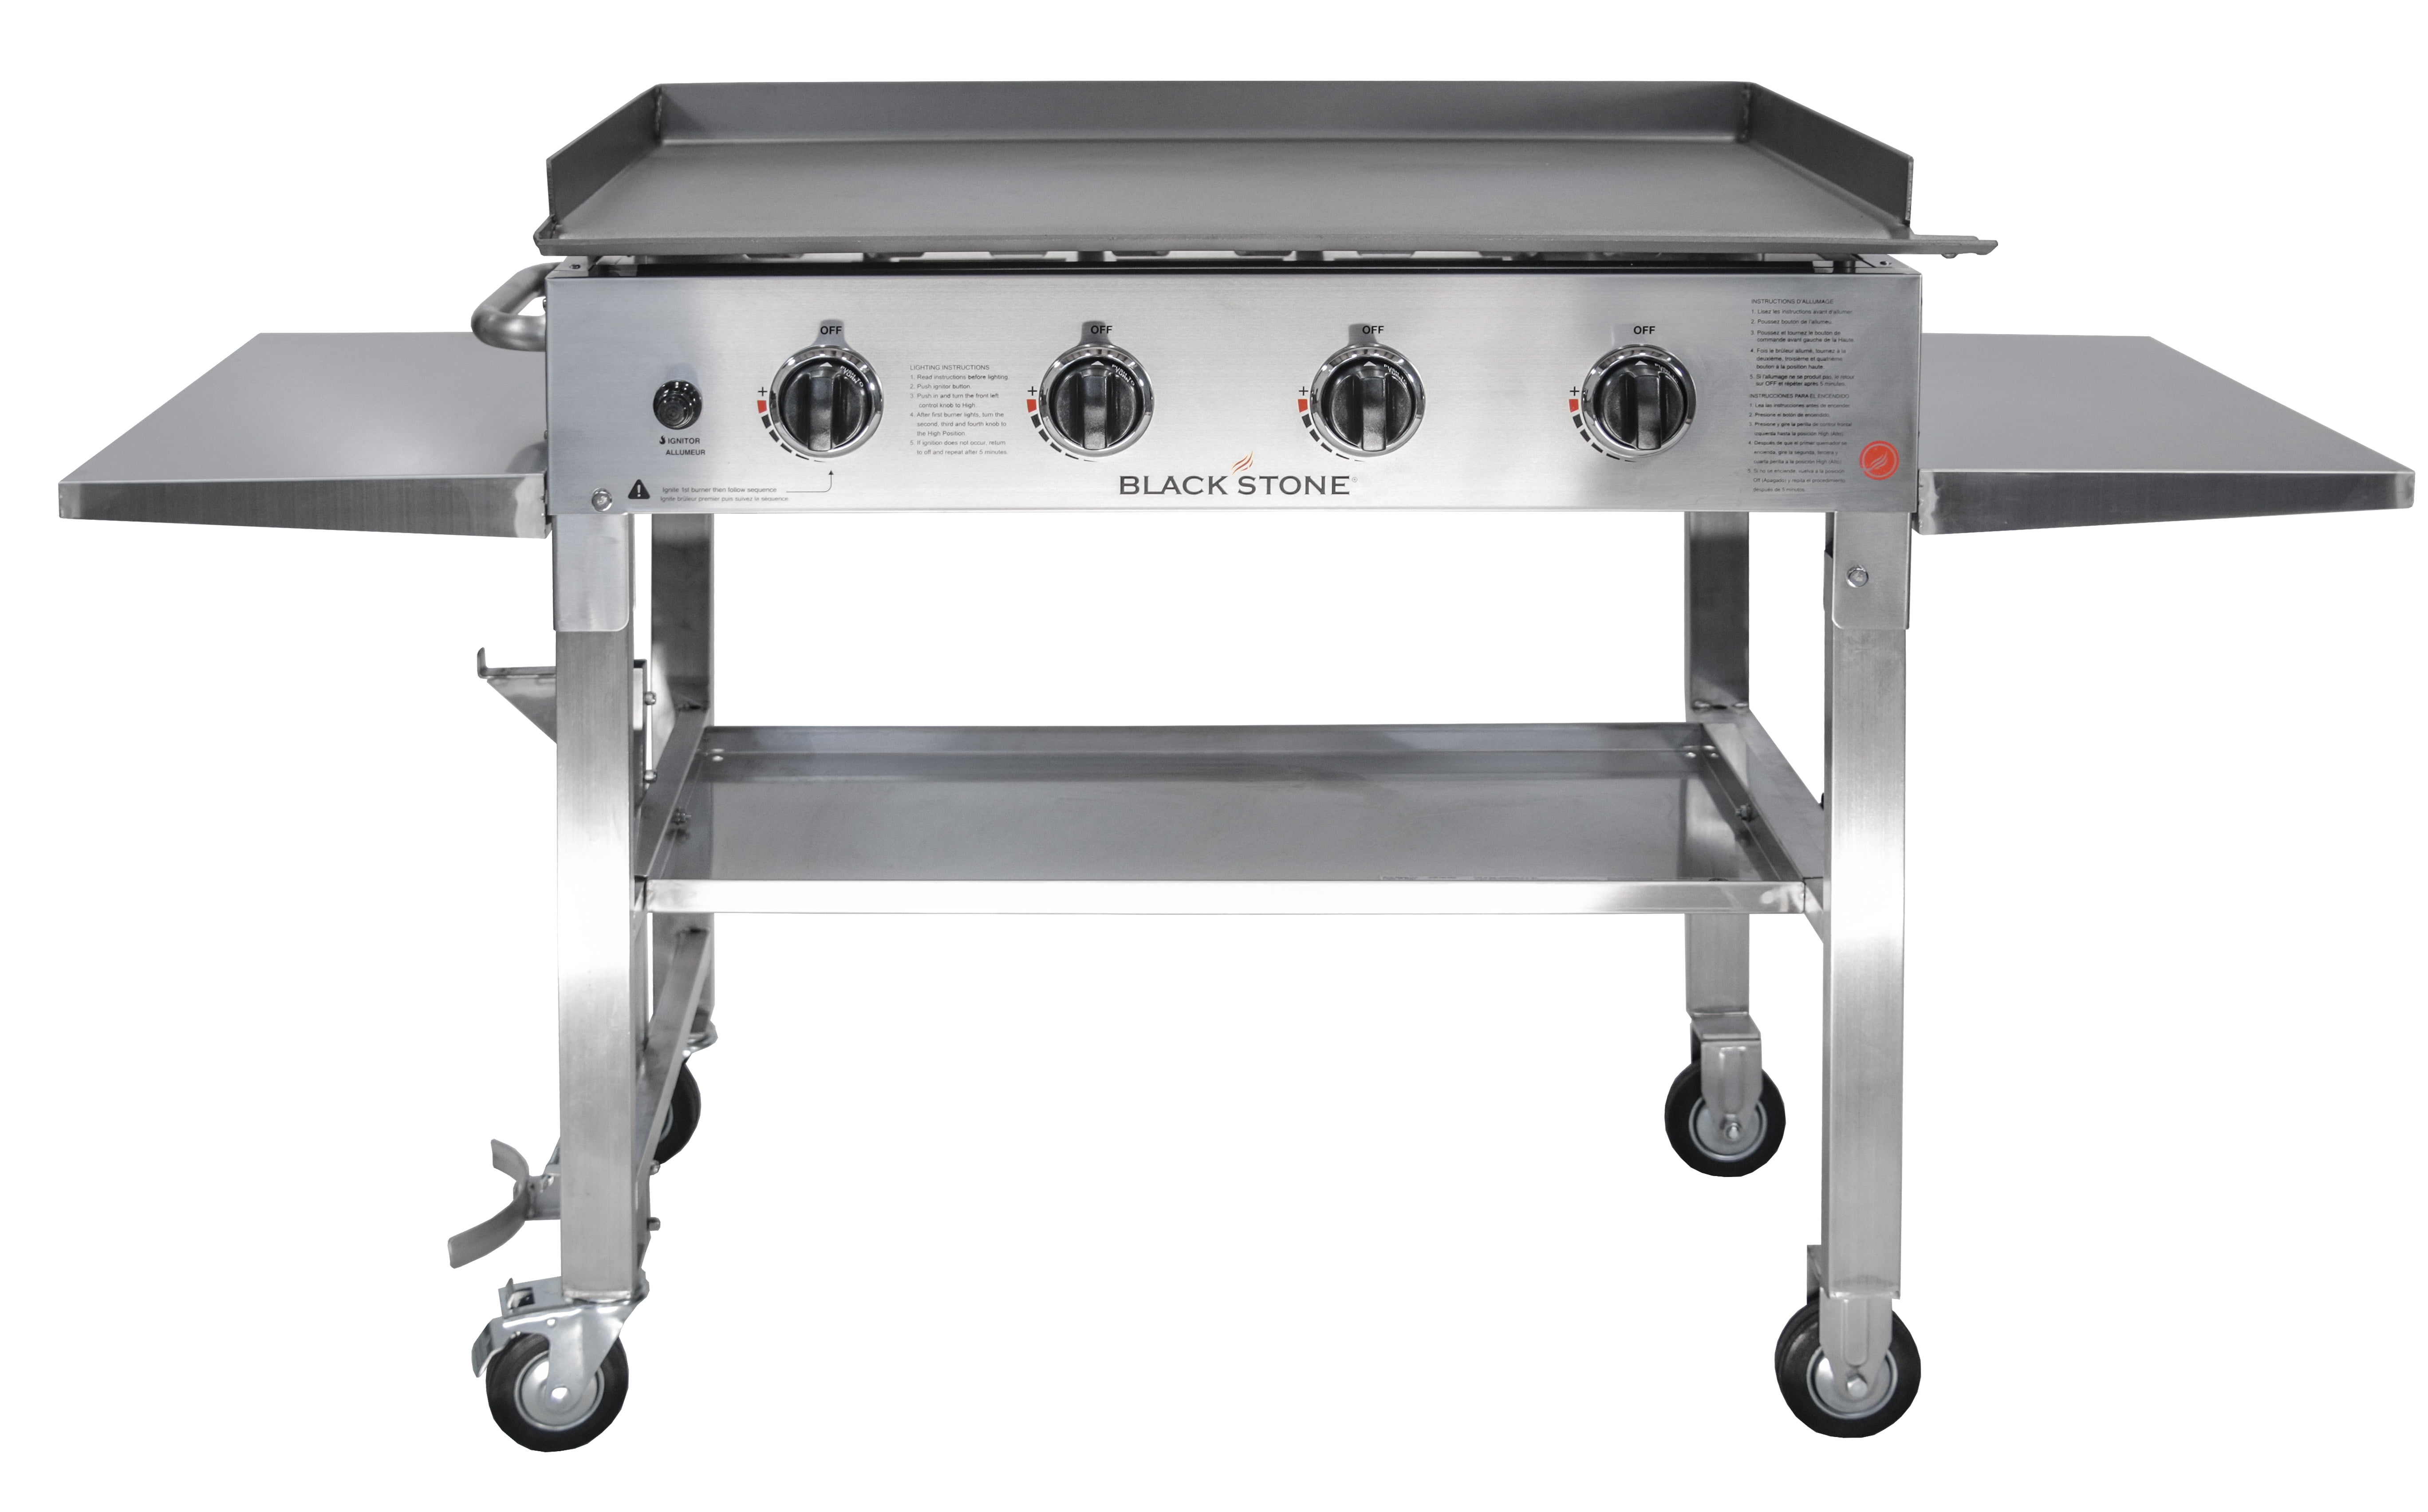 Blackstone 36" Stainless-Steel Griddle Cooking Station - Walmart.com 36 Stainless Steel Griddle Top